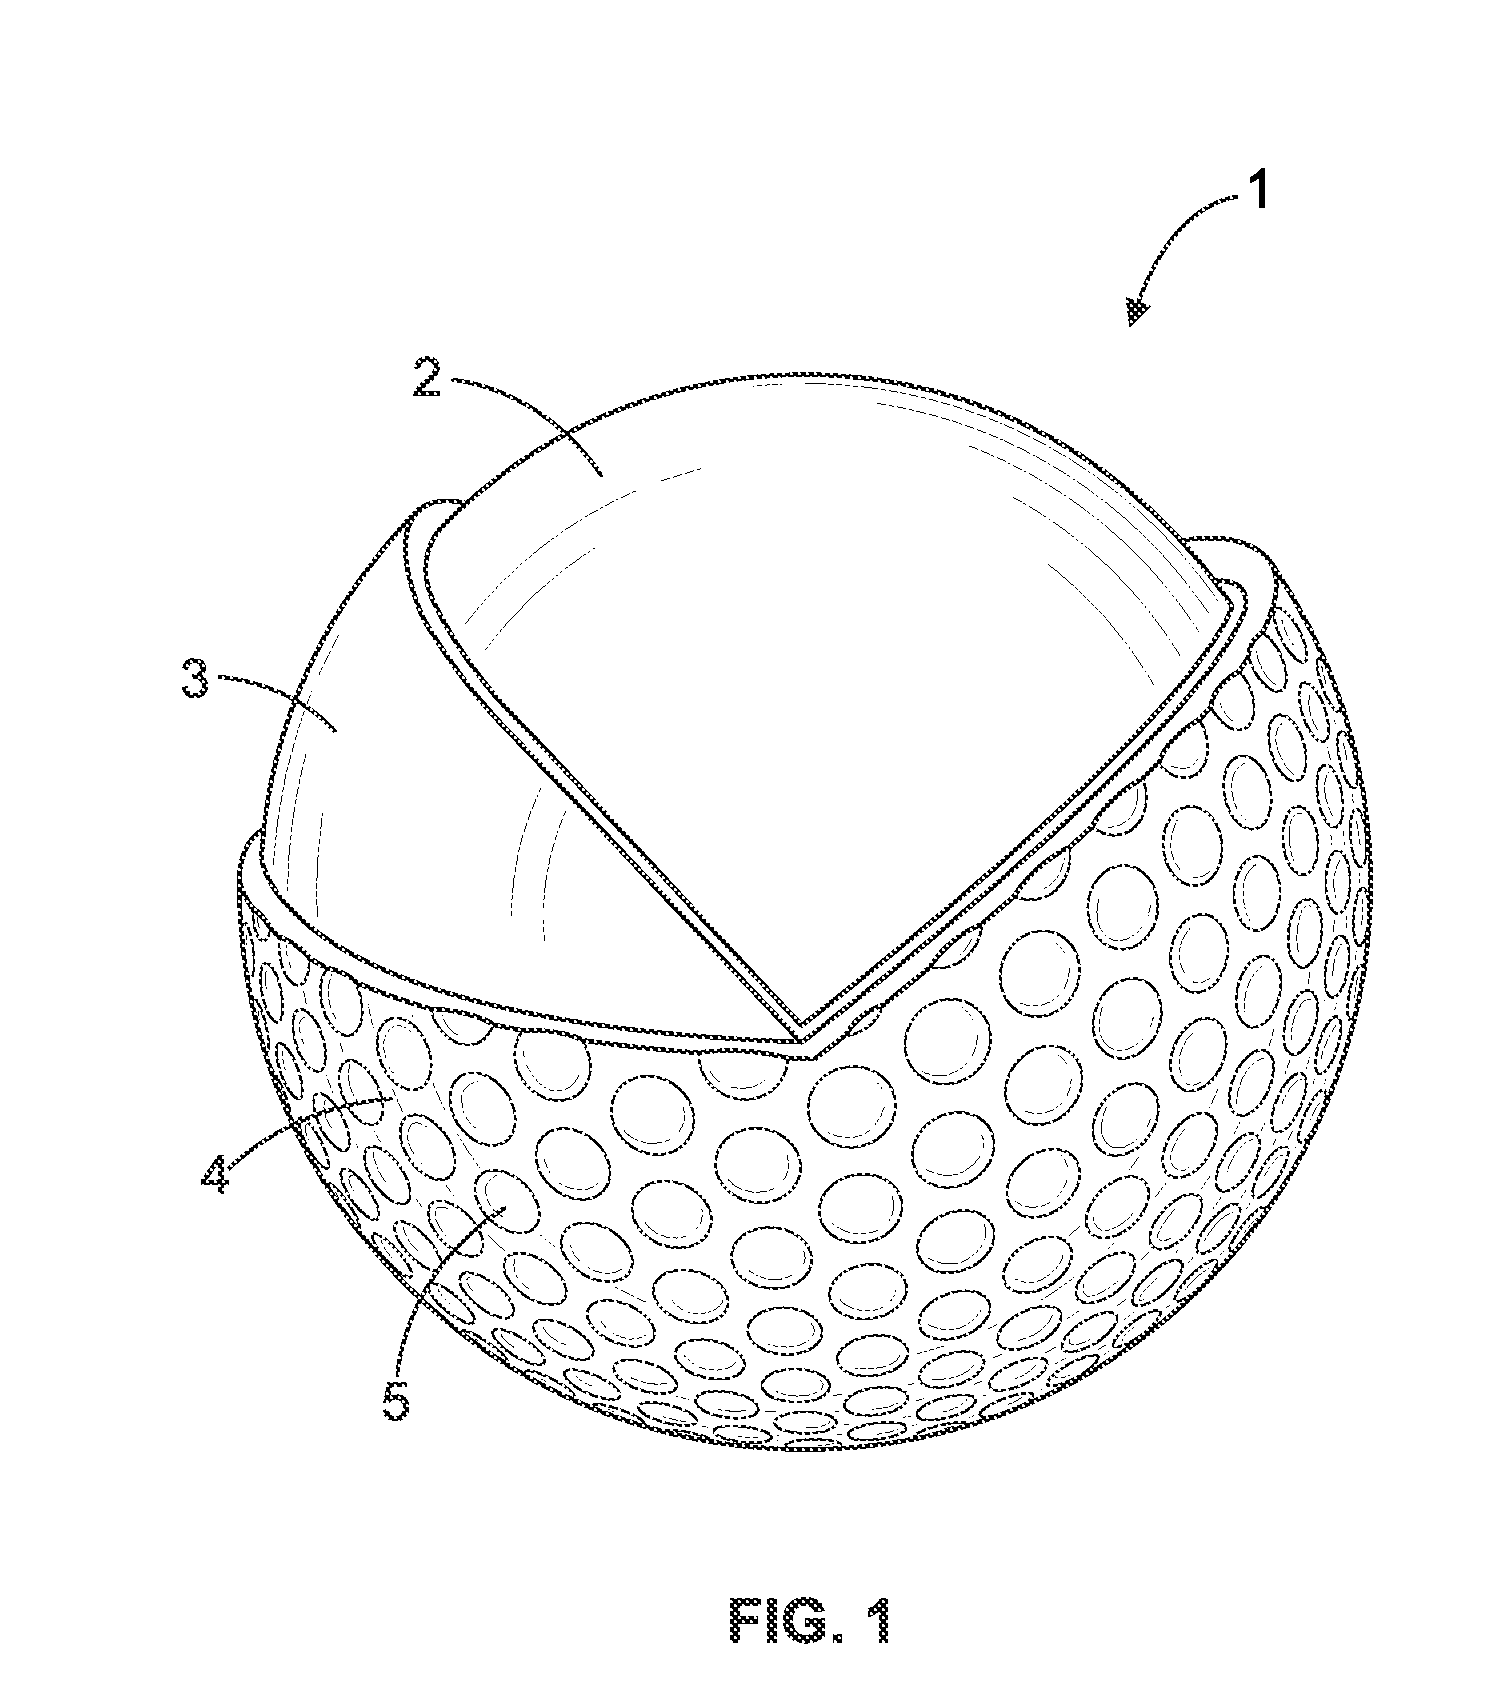 Golf ball and method of manufacturing a golf ball